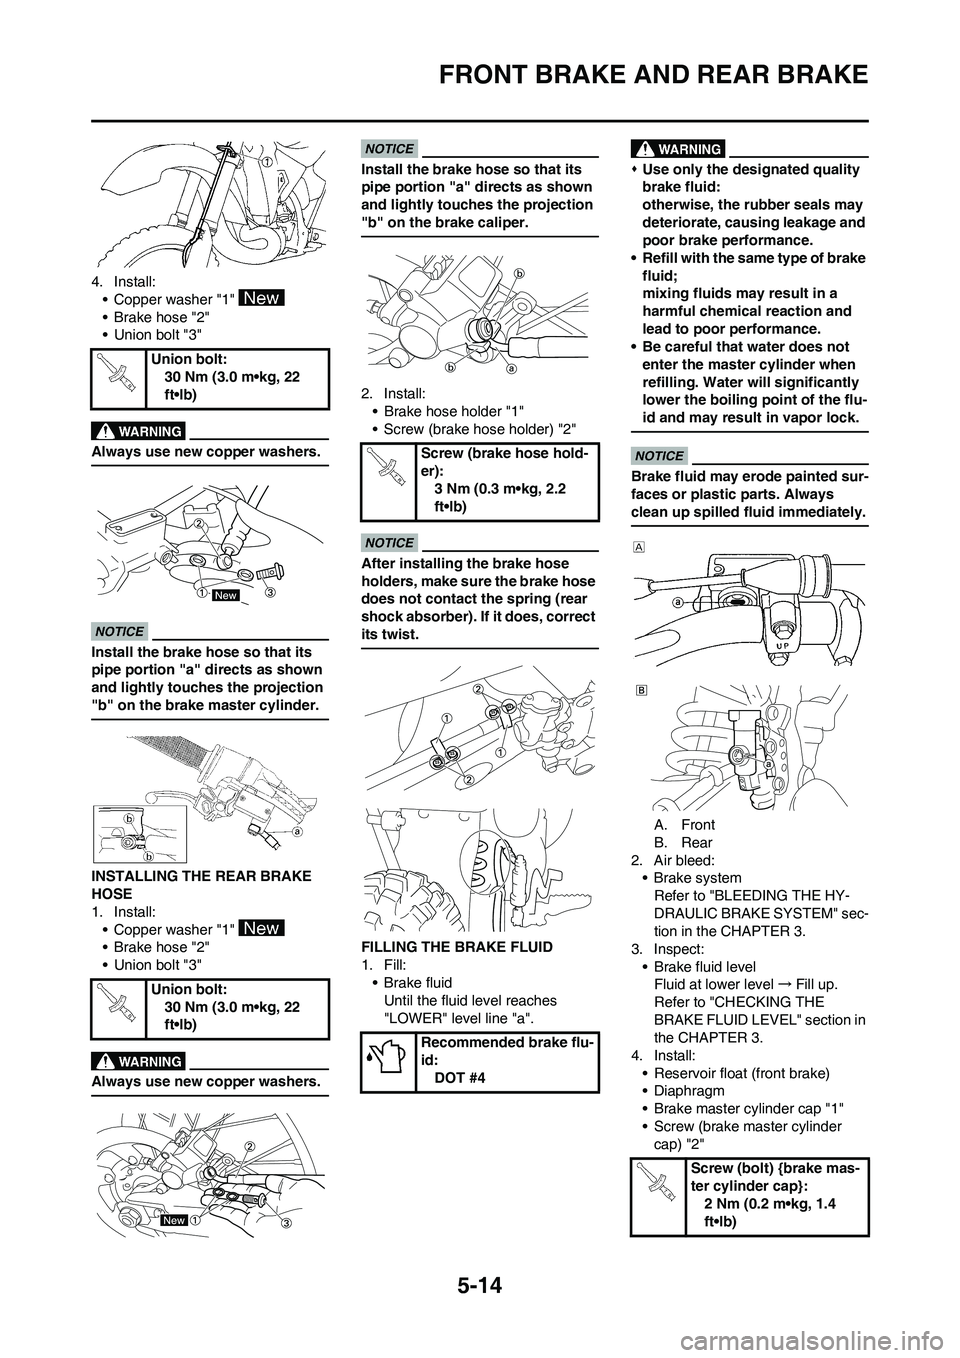 YAMAHA YZ250F 2009  Owners Manual 5-14
FRONT BRAKE AND REAR BRAKE
4. Install:
• Copper washer "1" 
•Brake hose "2"
• Union bolt "3"
Always use new copper washers.
Install the brake hose so that its 
pipe portion "a" directs as s